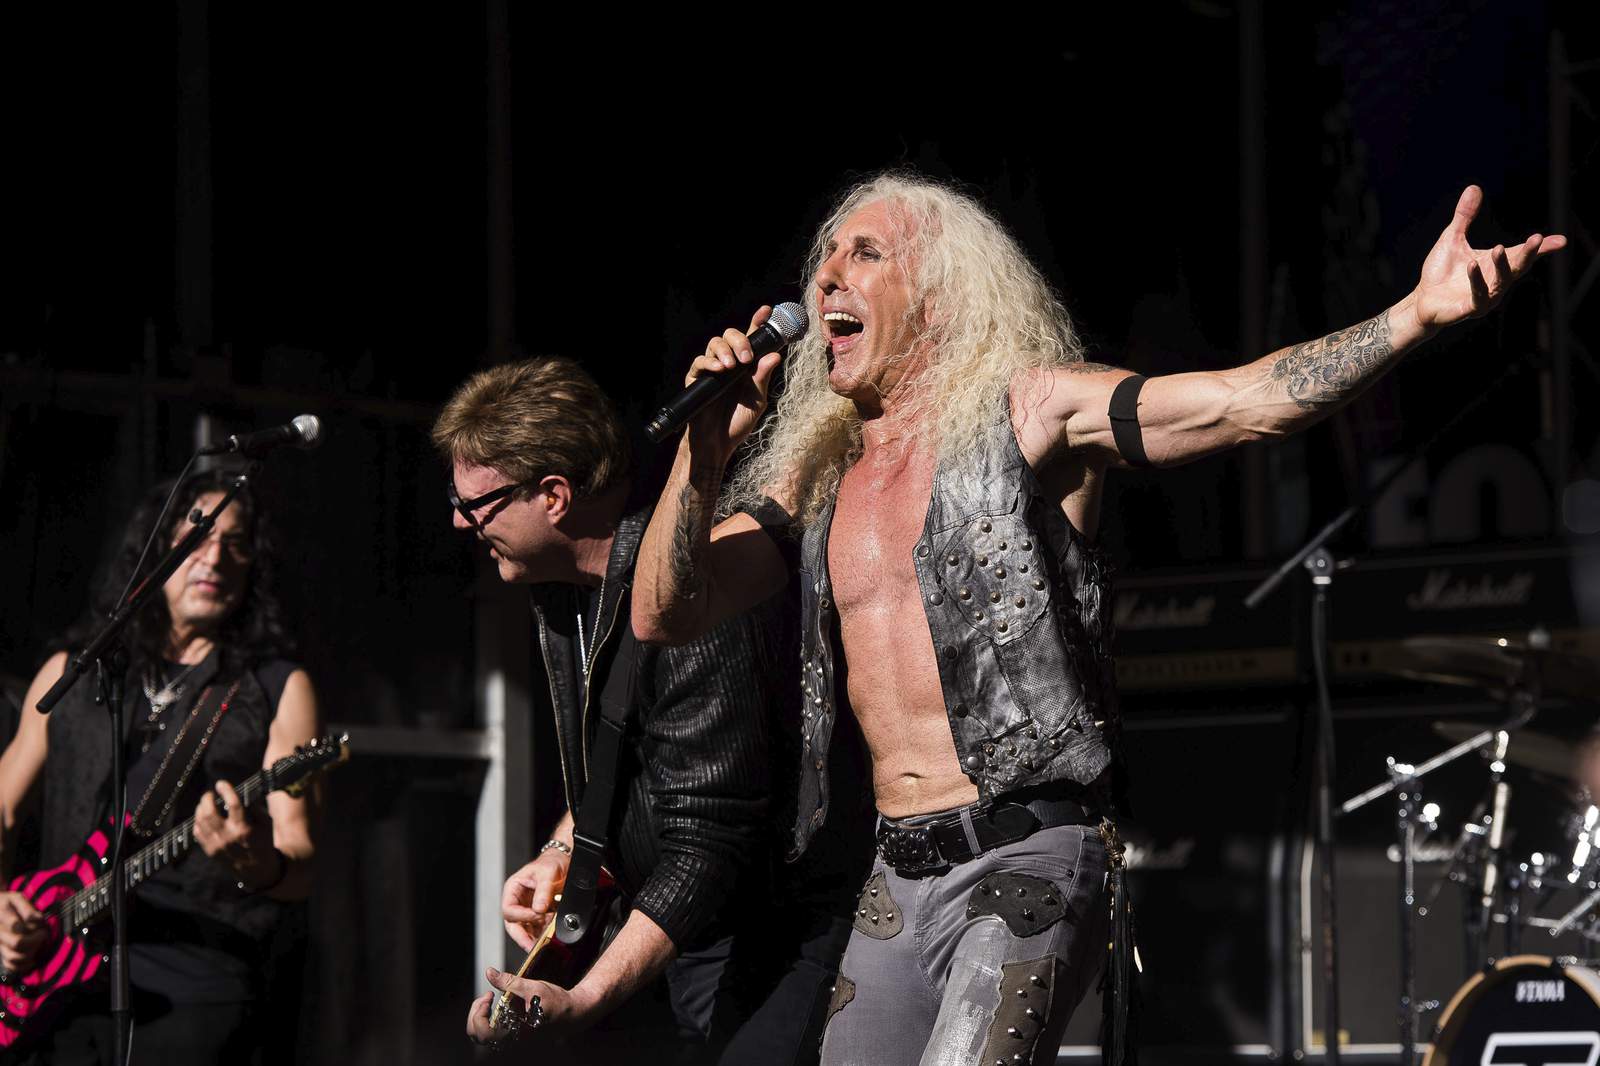 Twisted Sister singer to anti-maskers: Don't use our song